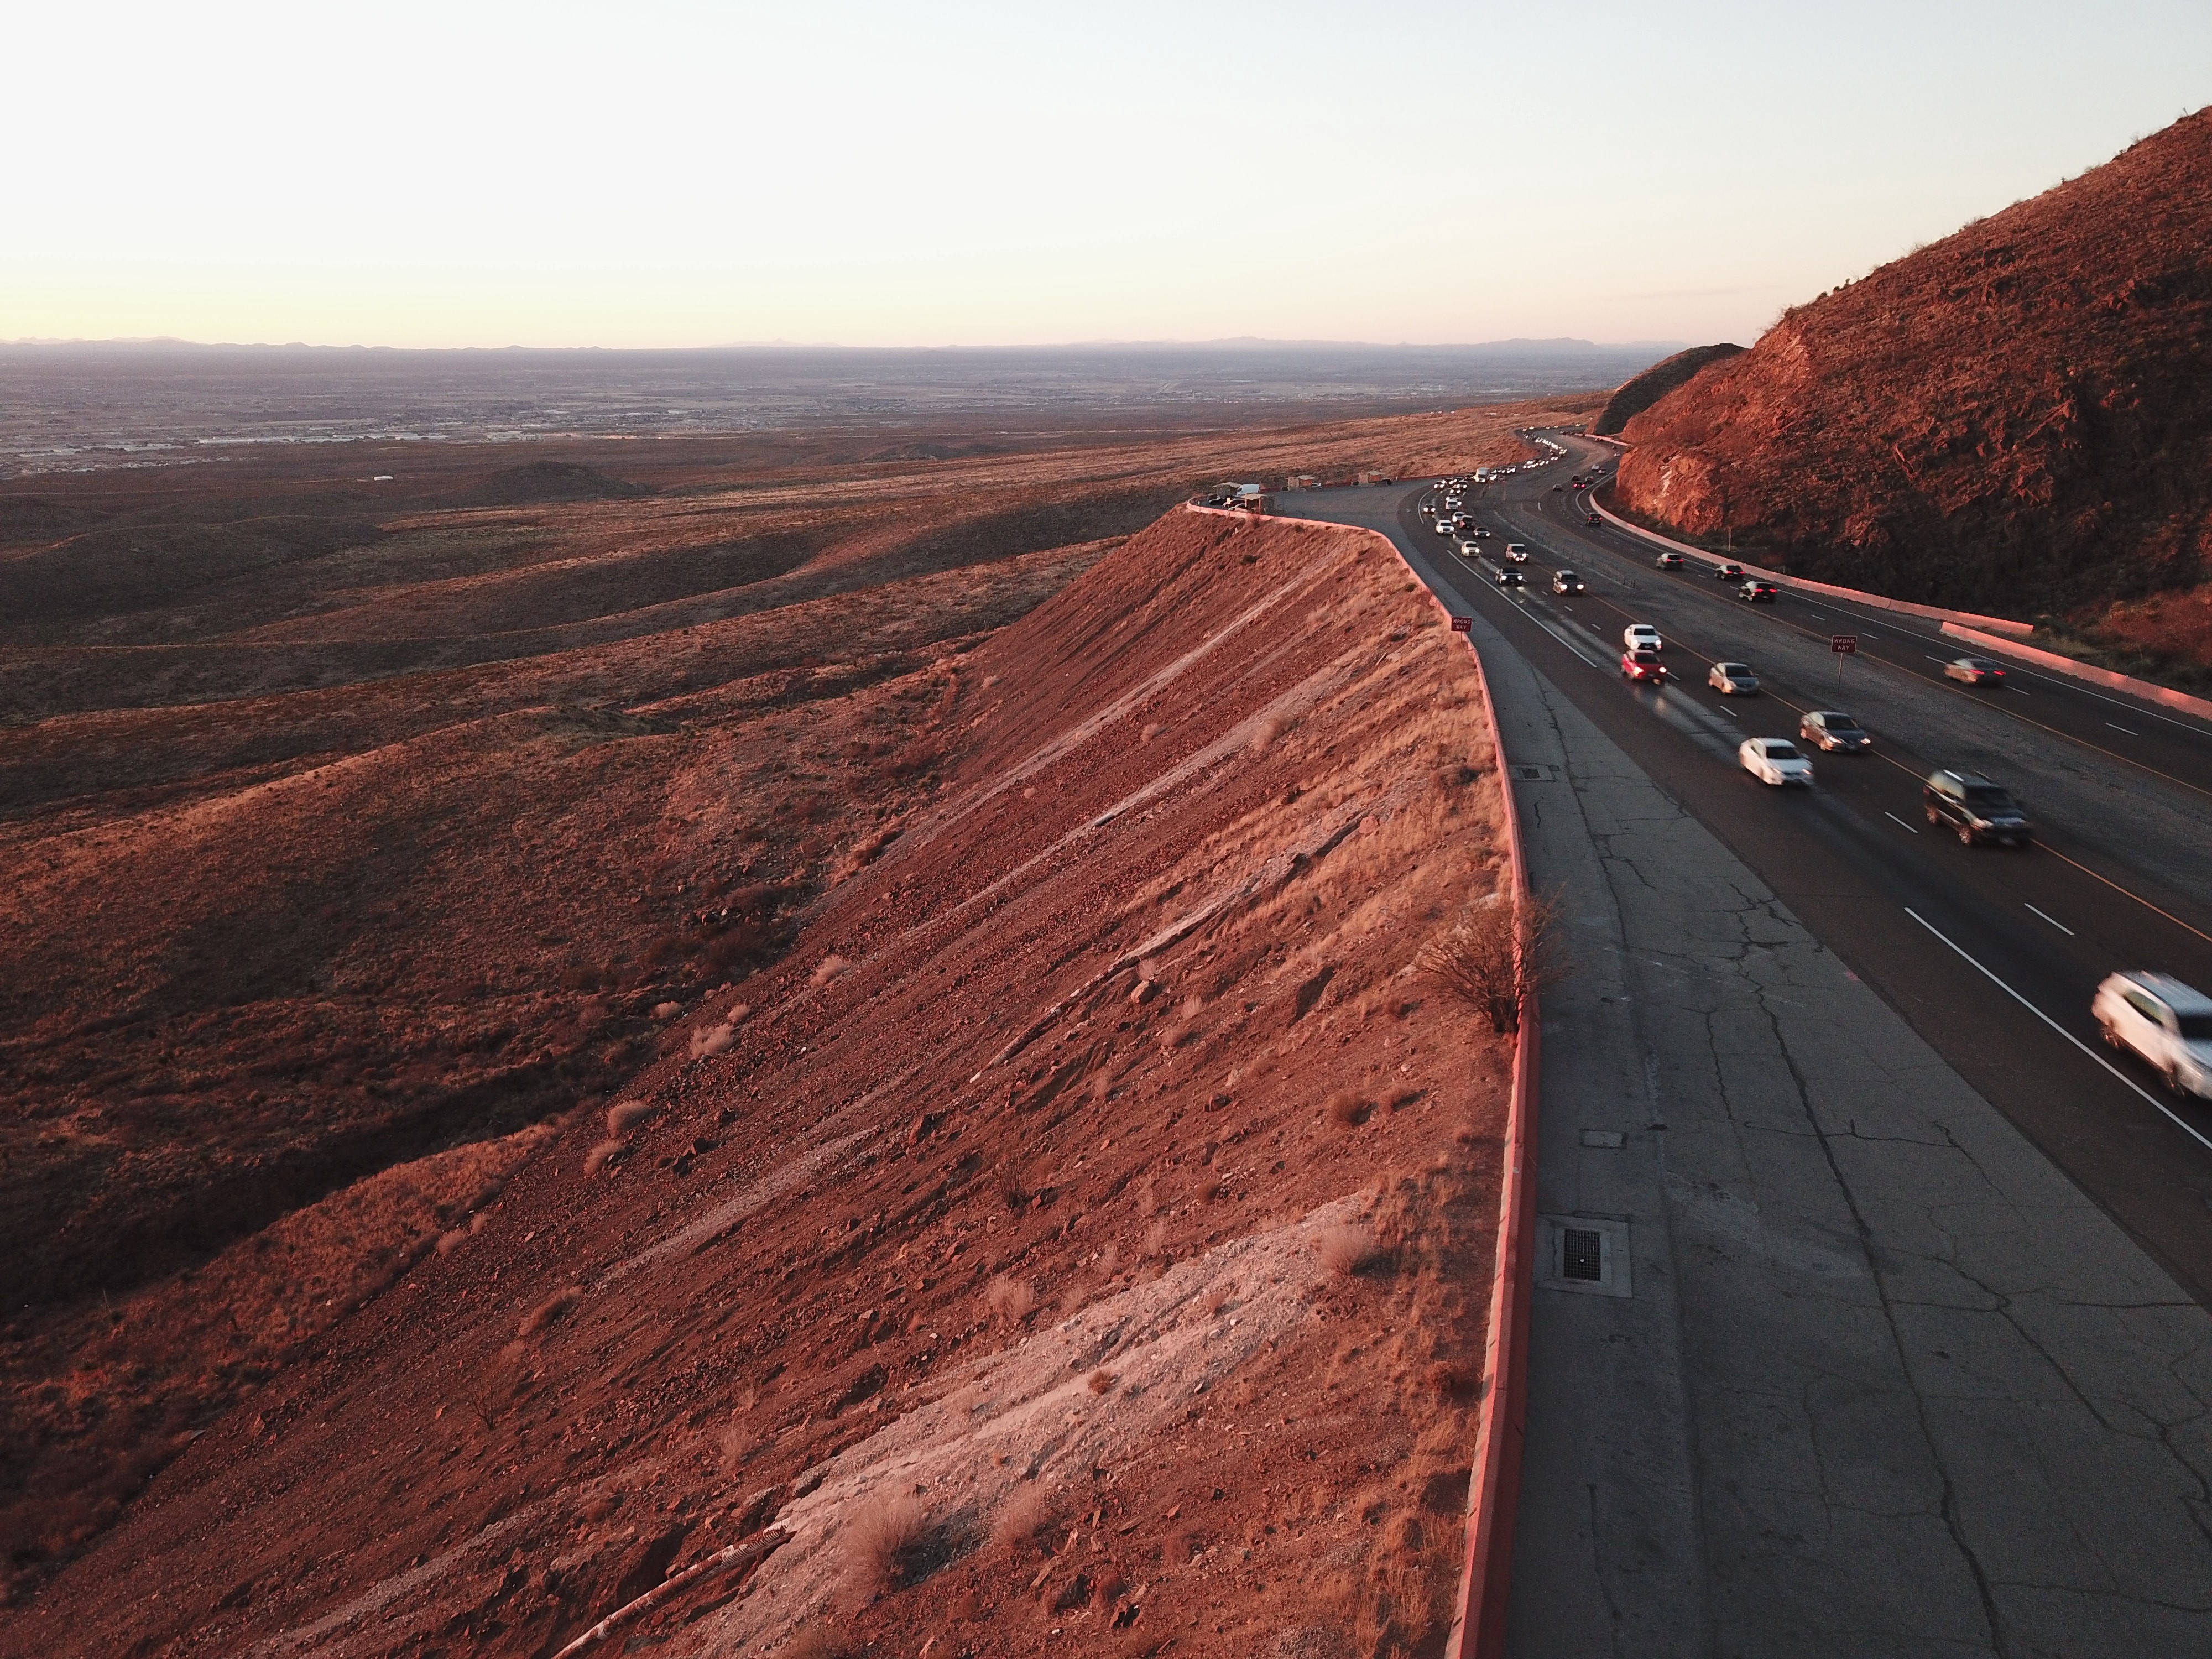 A highway, visualizing the next step for Design Systems